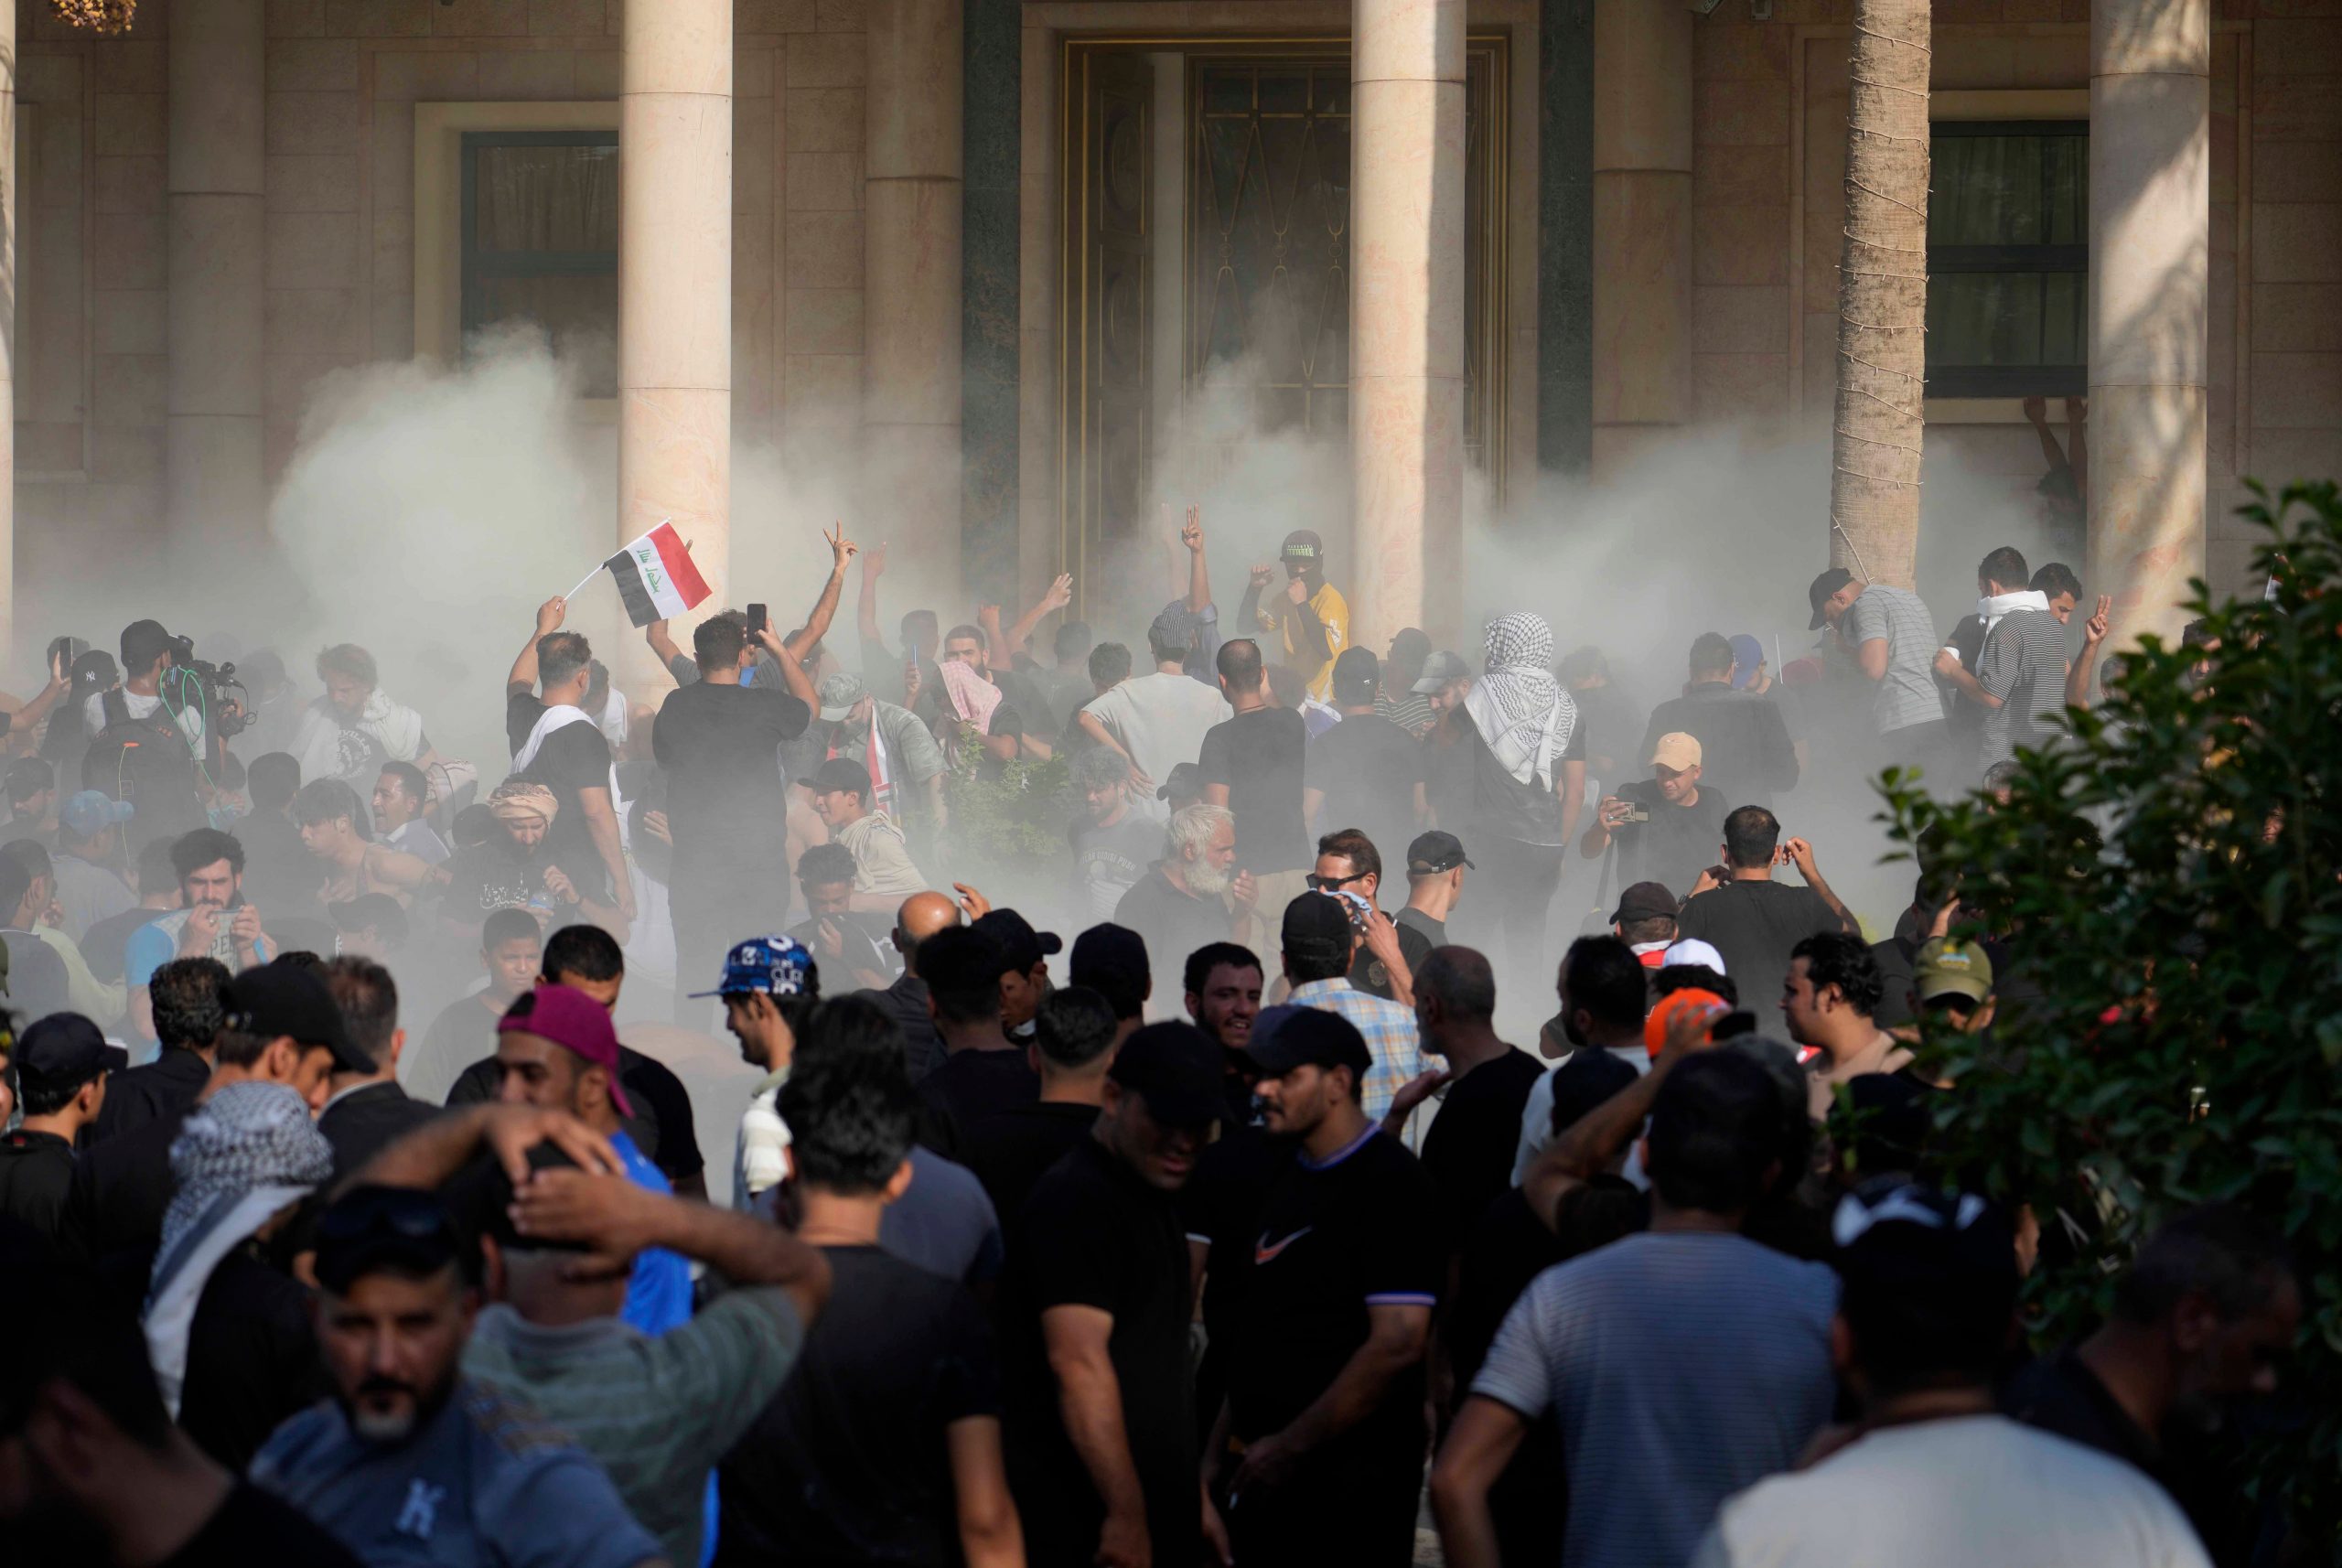 Iraq protests: How other countries have reacted so far